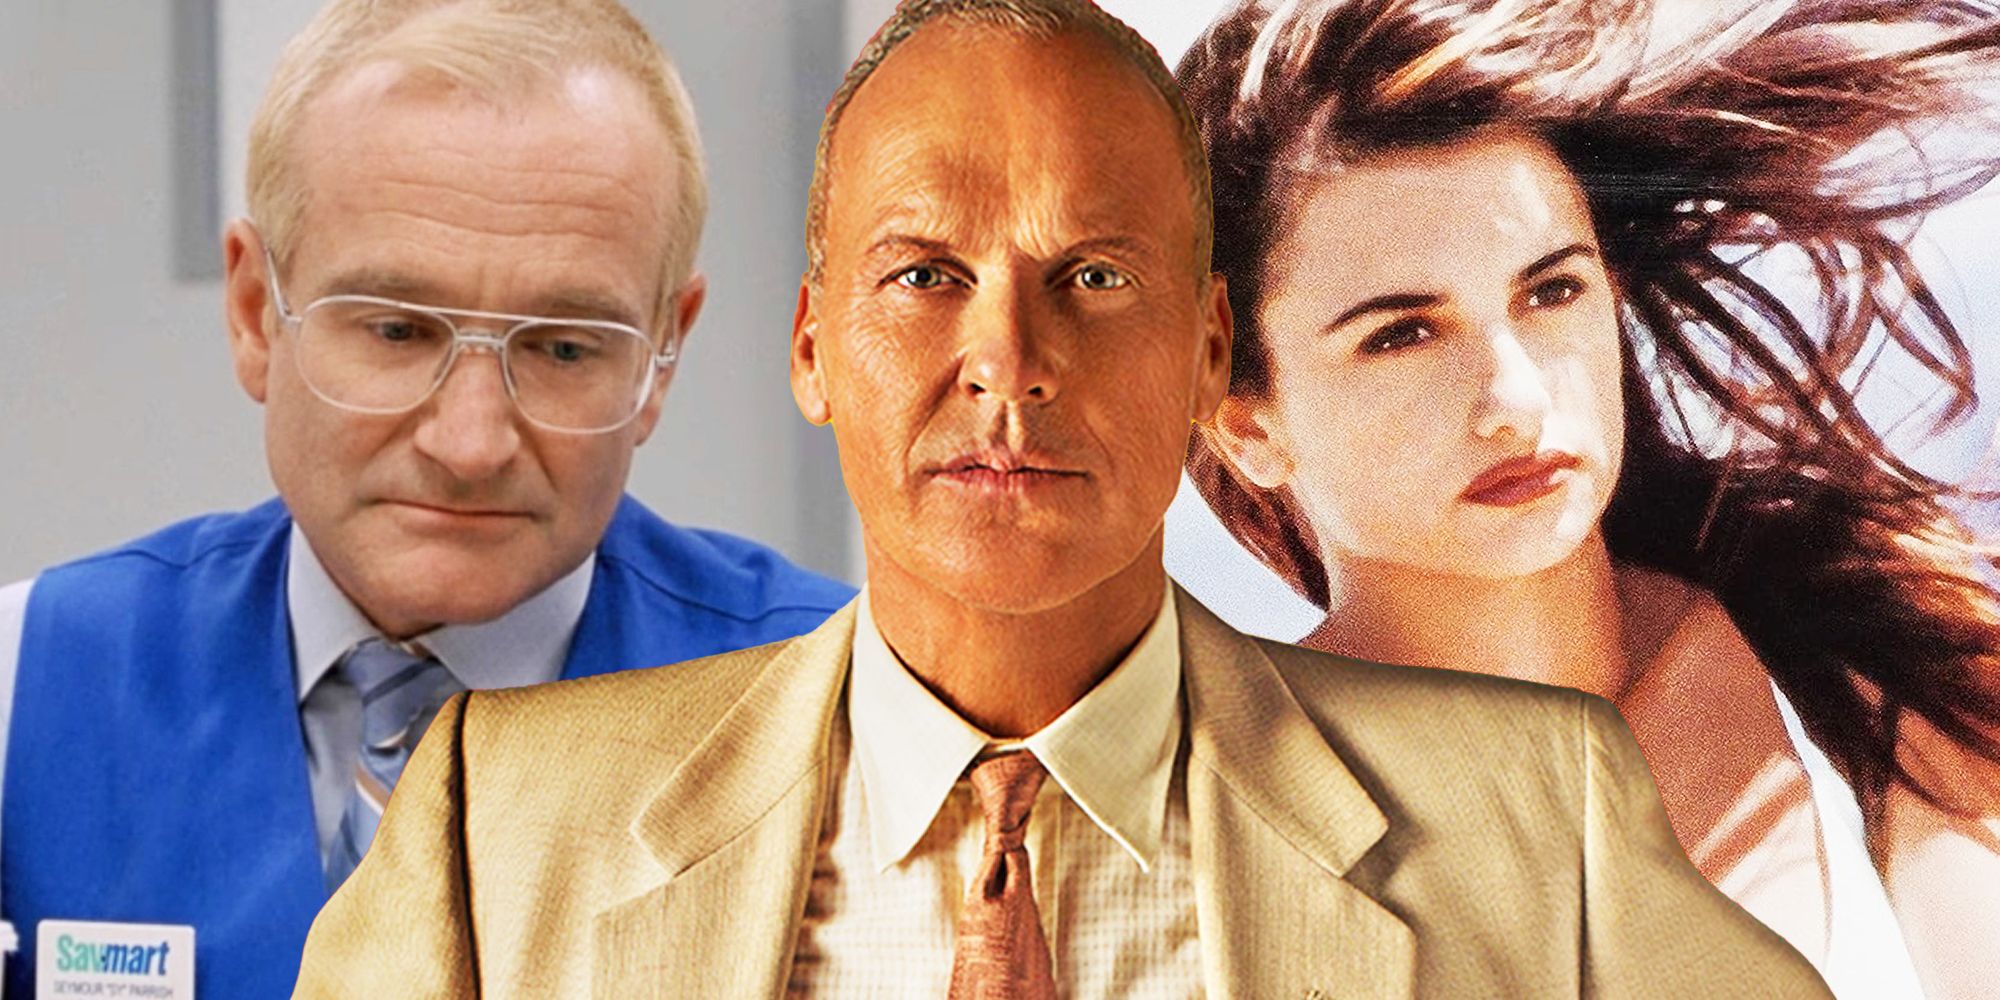 Michael Keaton in The Founder, Robin Williams in One Hour Photo, and Penelope Cruz in Open Your Eyes